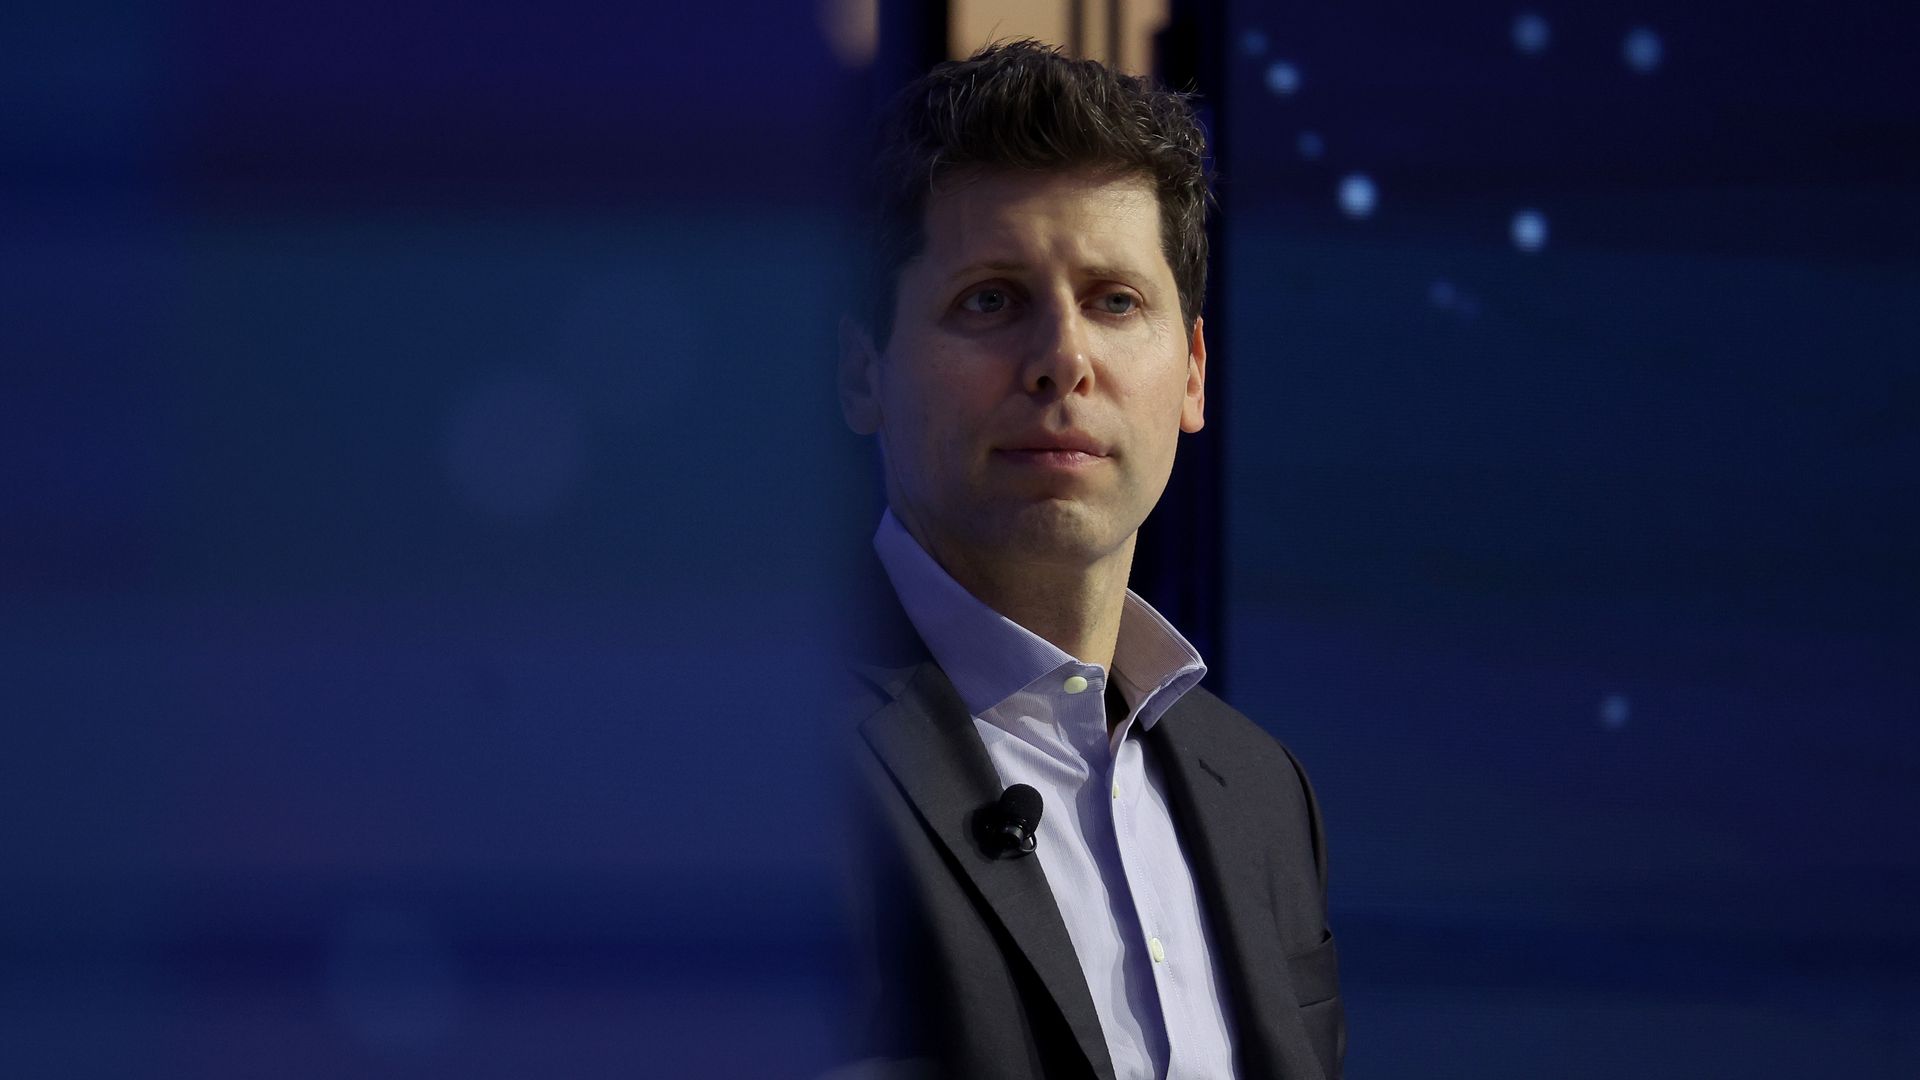 OpenAI CEO Sam Altman looks on during the APEC CEO Summit at Moscone West on November 16, 2023 in San Francisco, California.